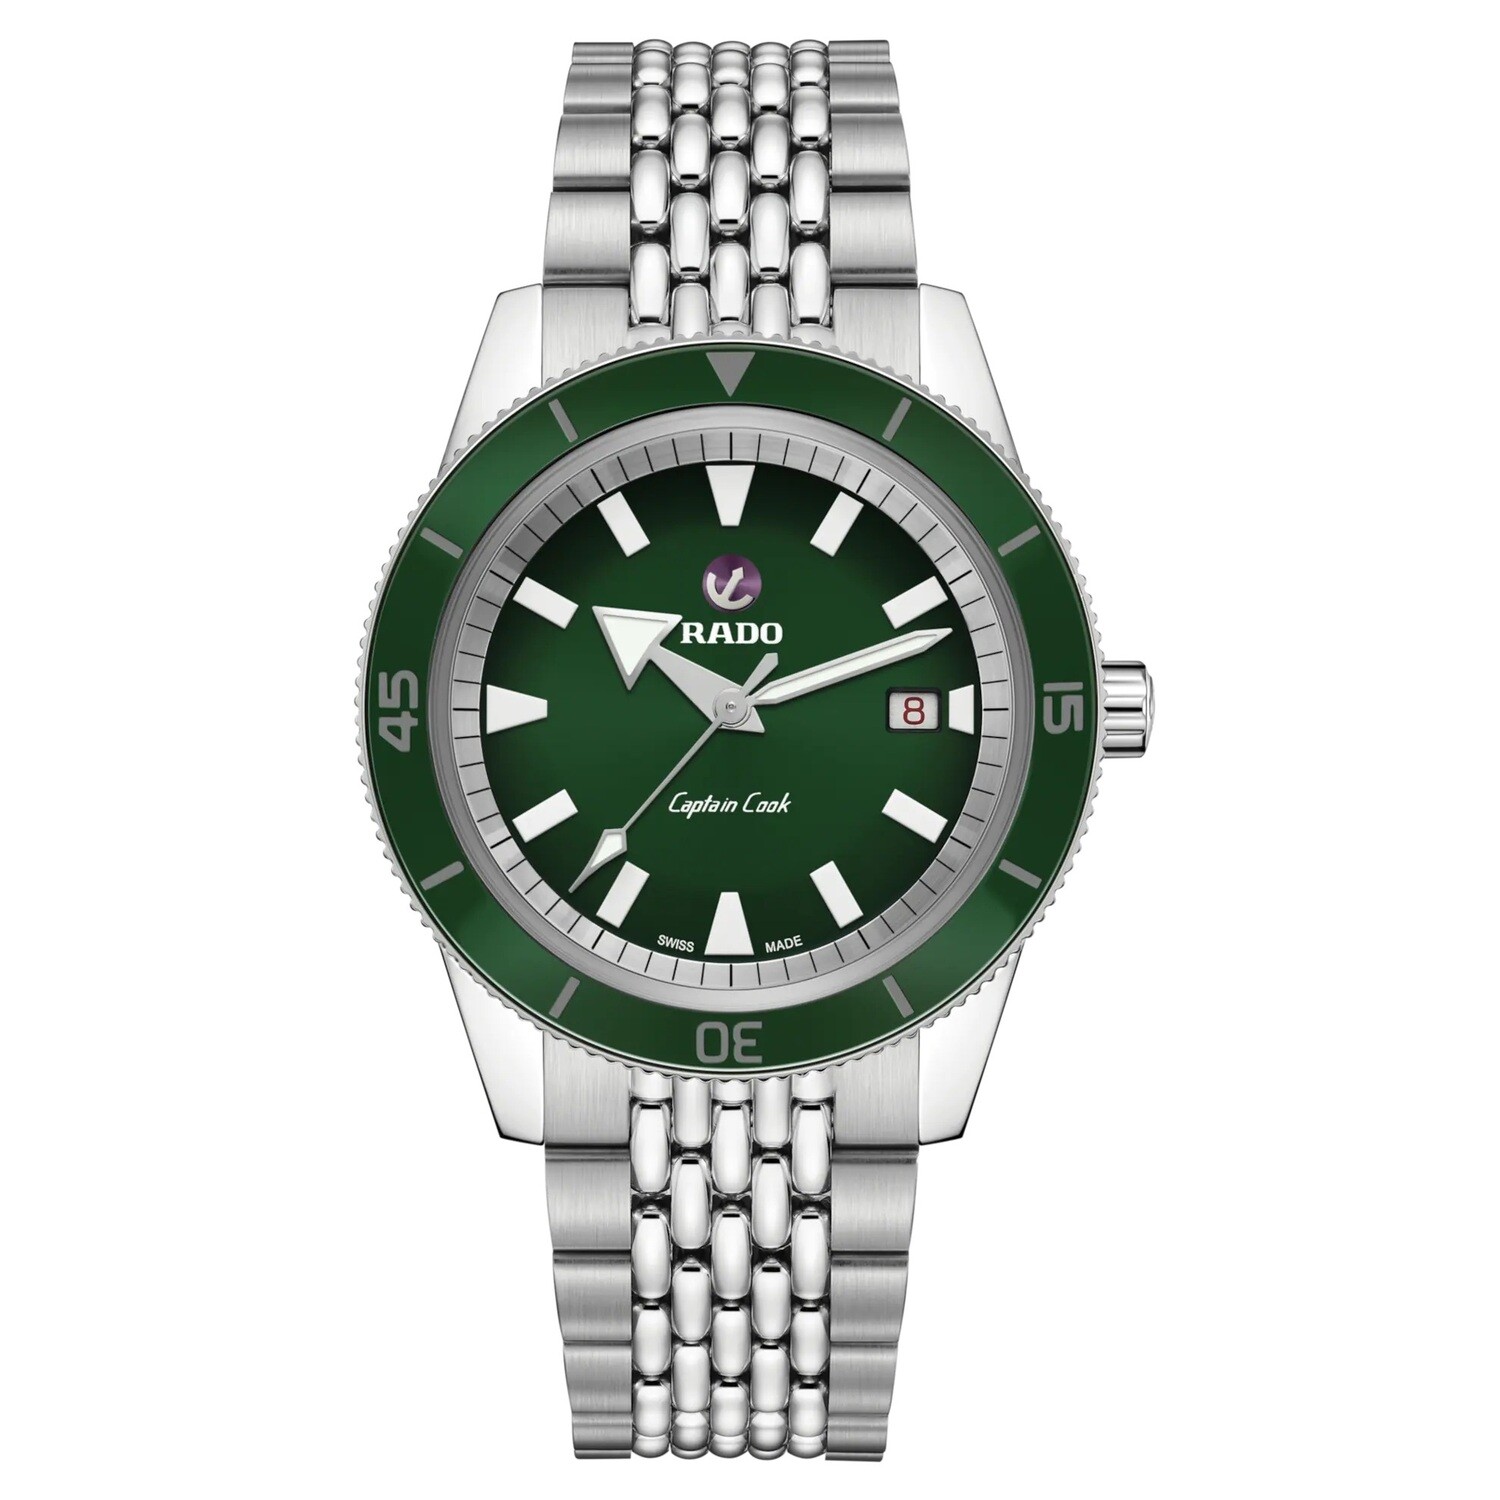 RADO Captain Cook Automatic R32505313 42MM 200M Sapphire crystal with anti-reflective coating Dial Stainless Steel Green Dial Men's Watch 80h Power Reserve SWISS MADE automatic men's watch